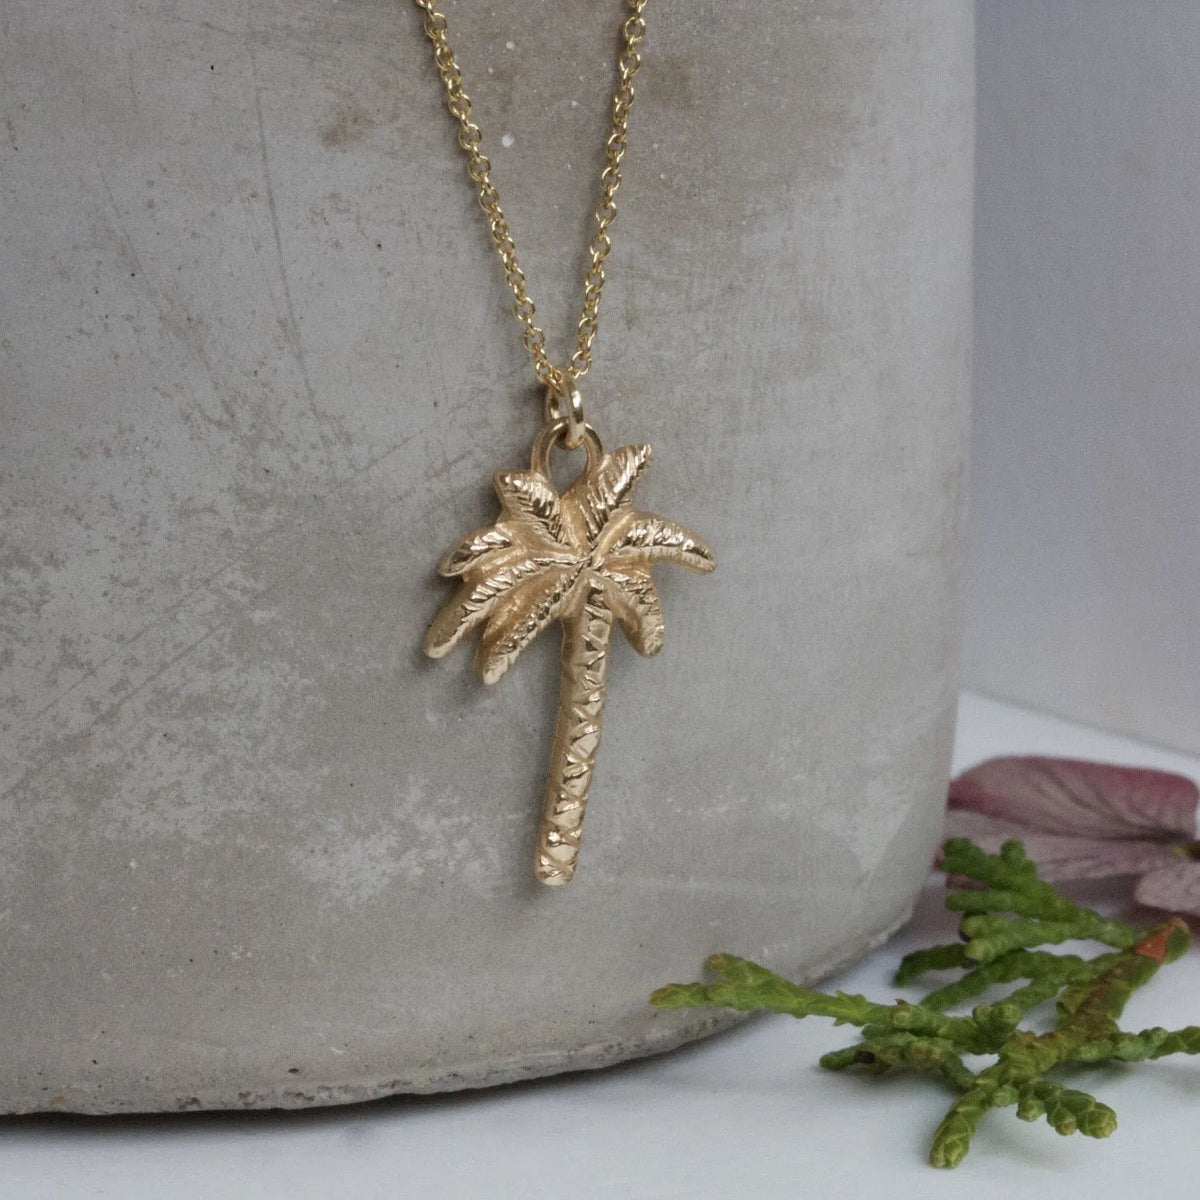 Paradise Palms - Palm Tree Pendant in Gold with Diamonds - 24mm – Maui  Divers Jewelry